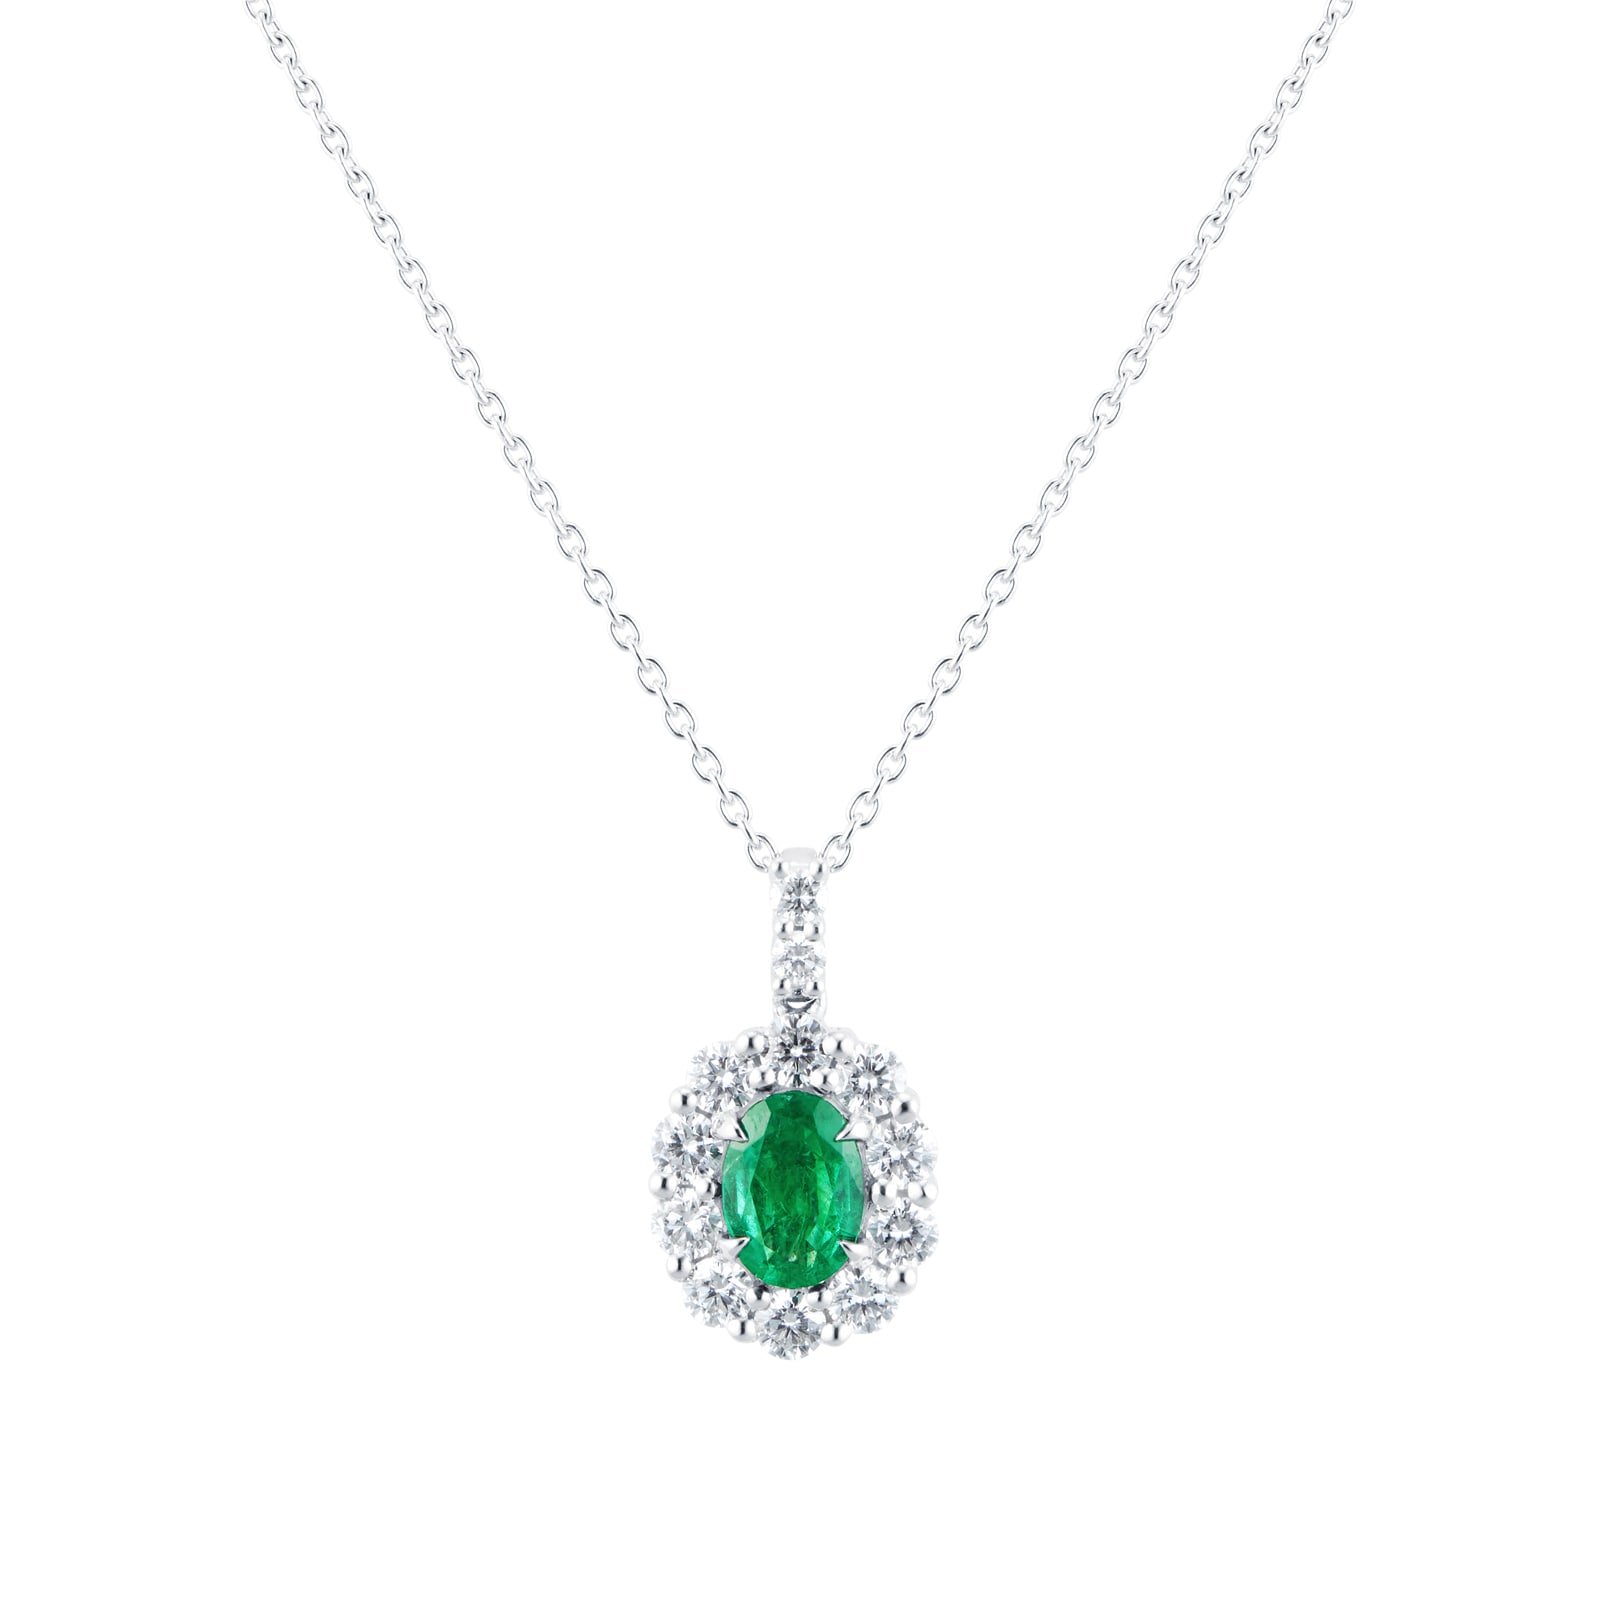 18c White Gold 0.67cttw Diamond and Emerald Cut Oval Pendant